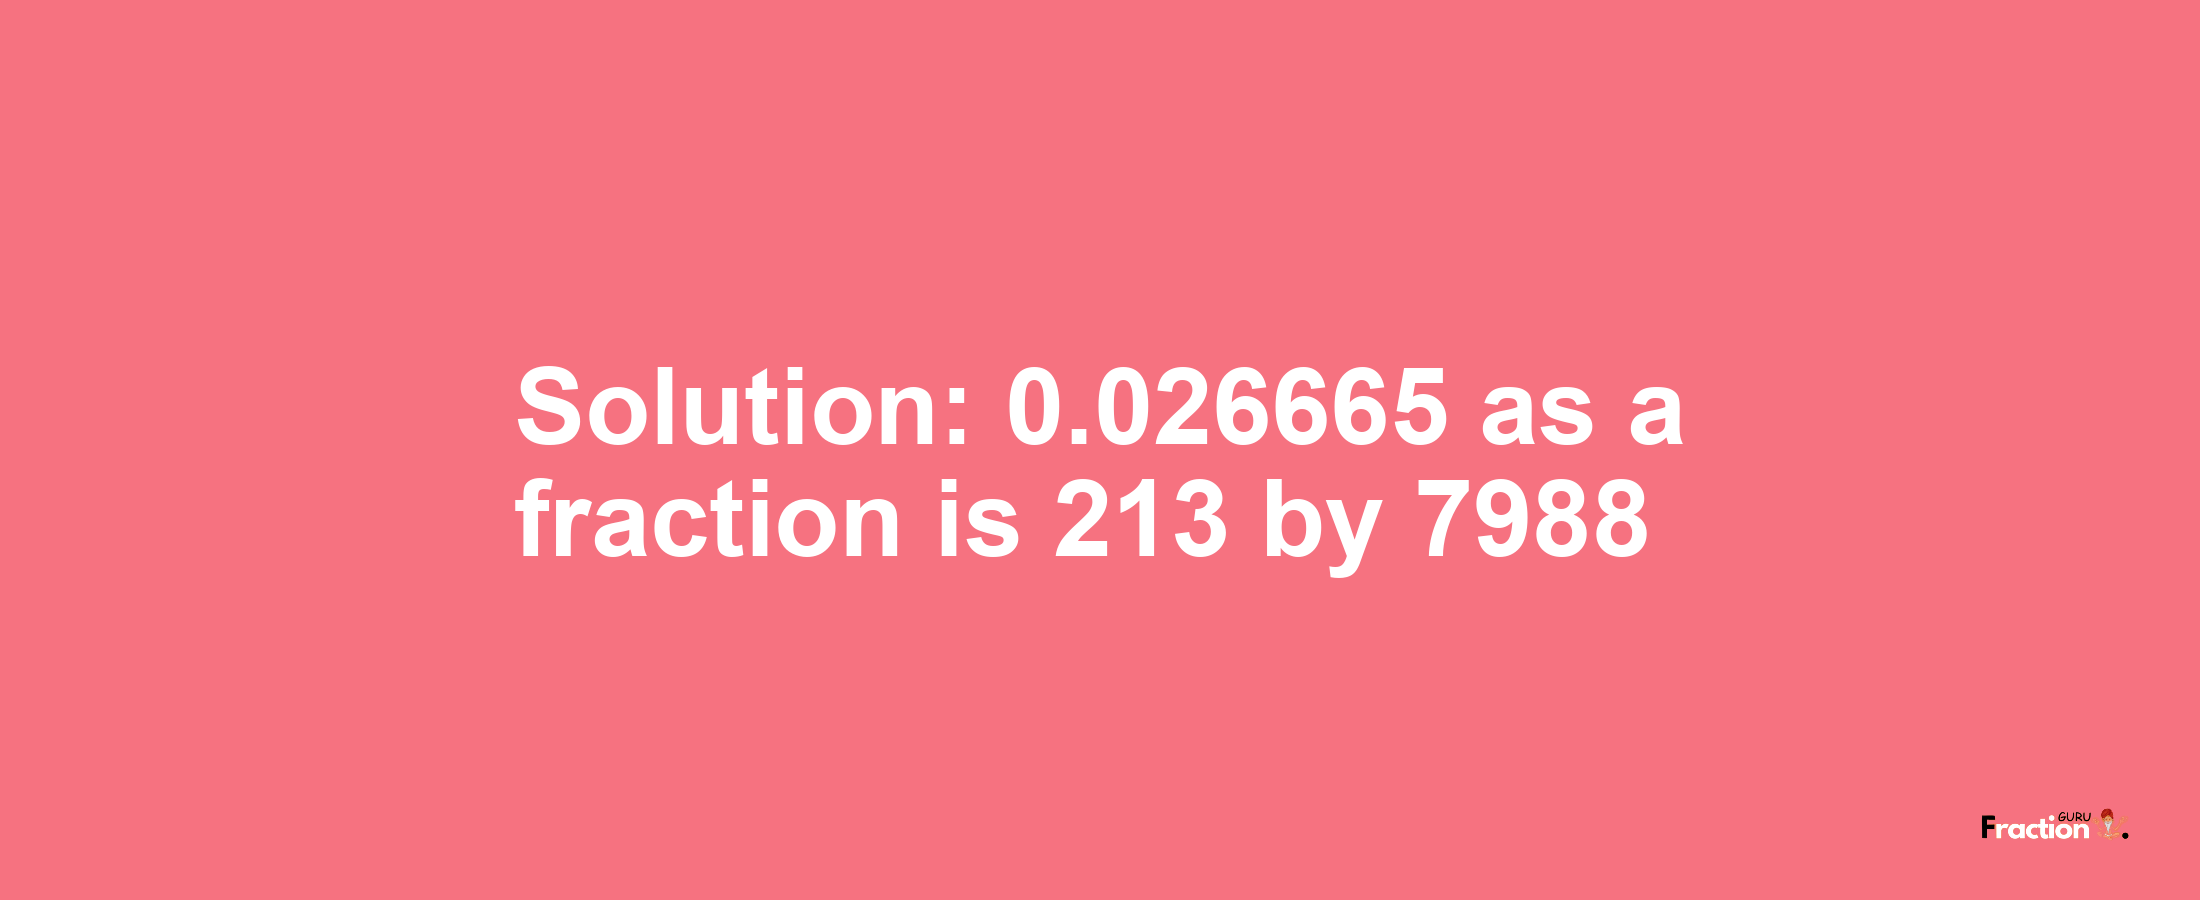 Solution:0.026665 as a fraction is 213/7988